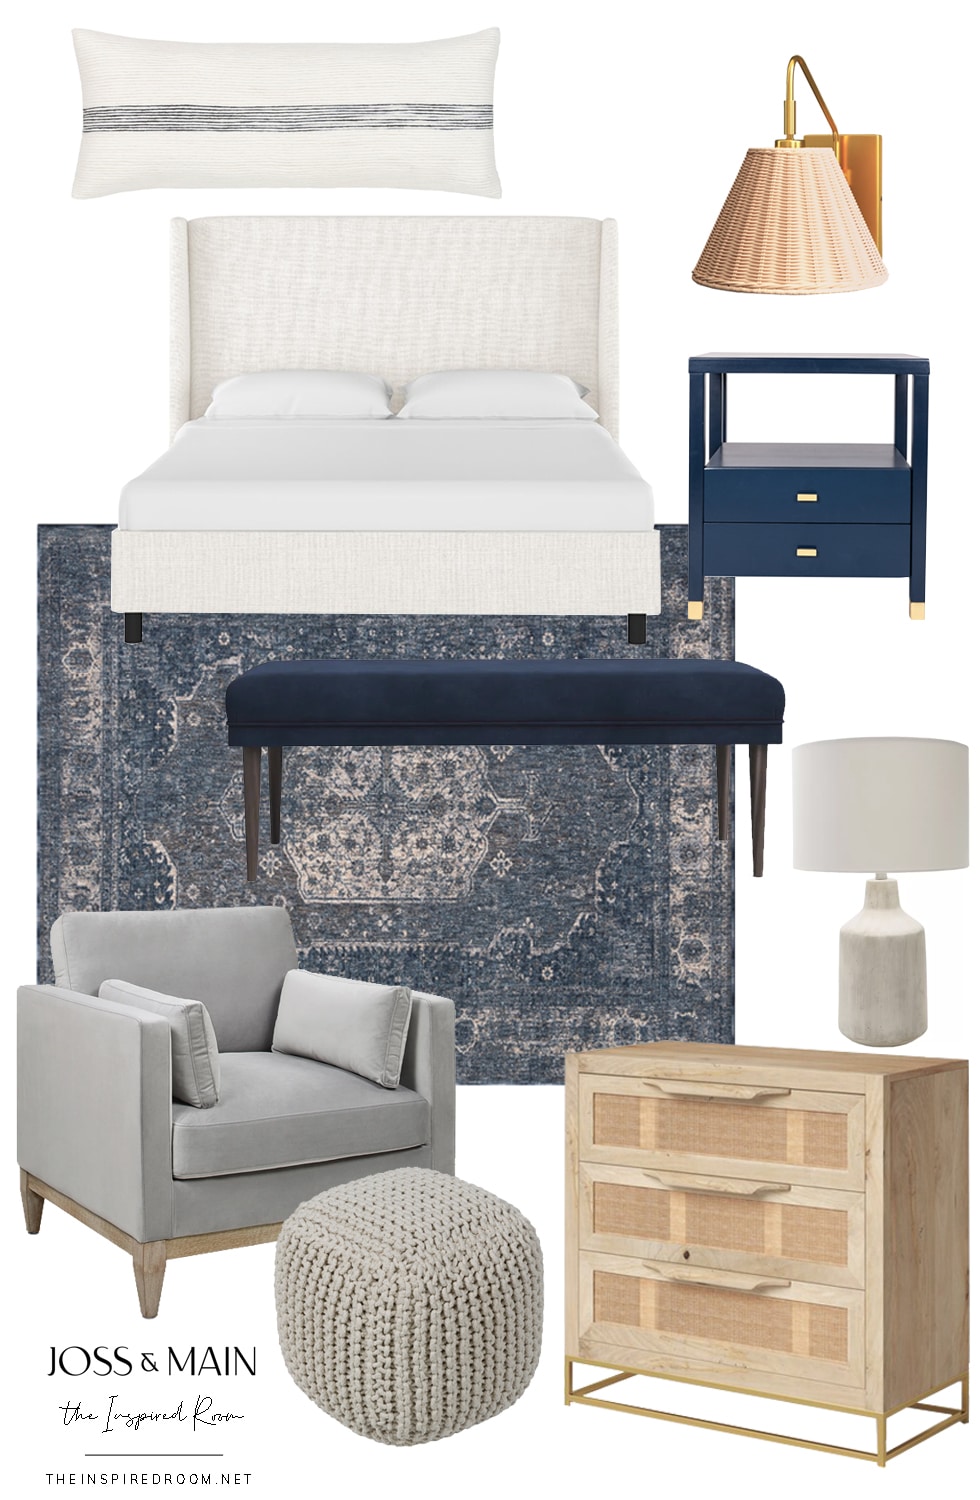 Mixing & Matching Decor to Create Your Own Style (+ Mood Boards)